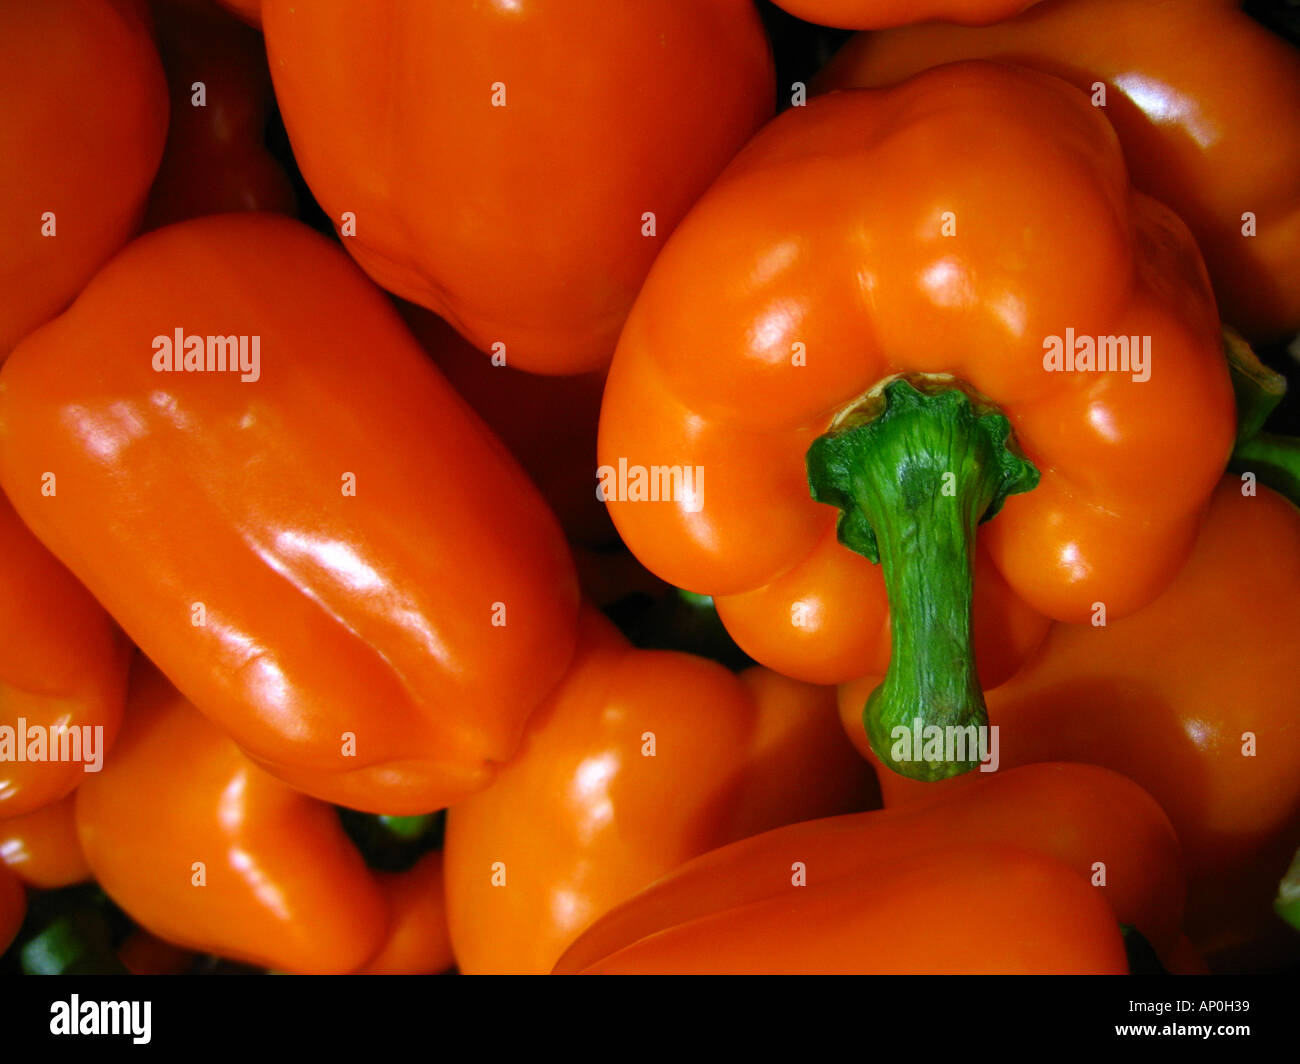 Tight shot of orange peppers Stock Photo